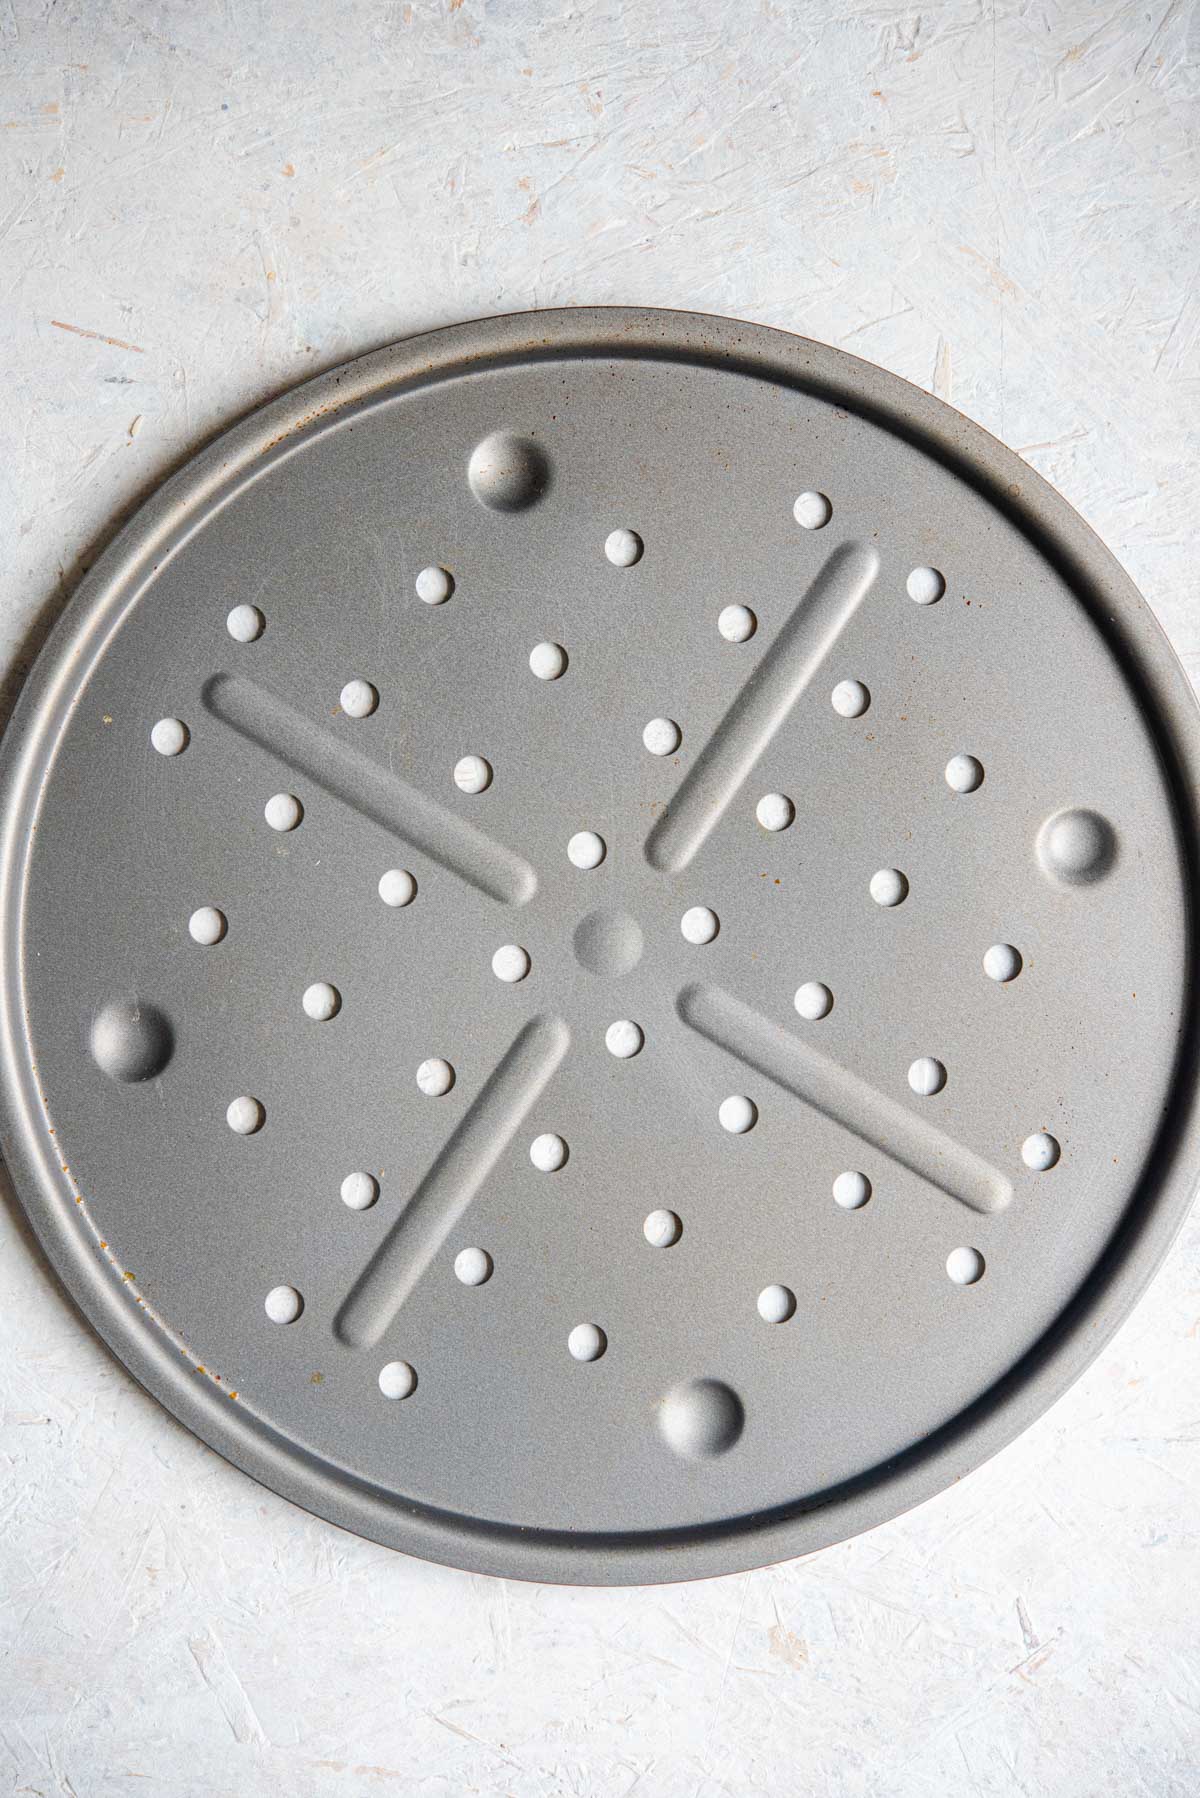 An overhead shot of a circular pizza tray with holes